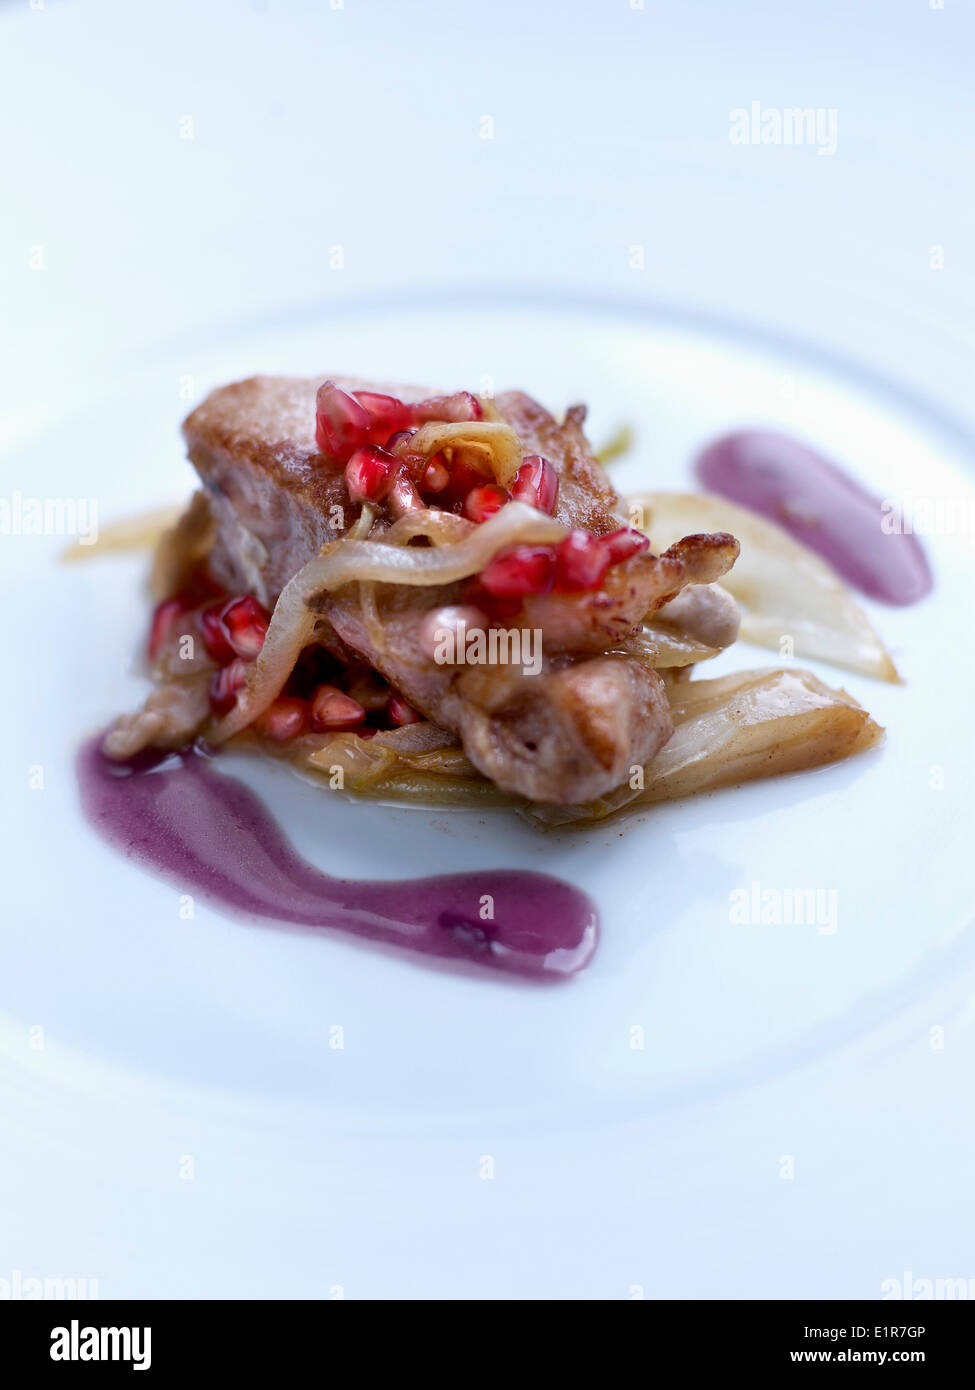 Veal with pan-fried chicory,red onion butter and pomegranate seeds Stock Photo